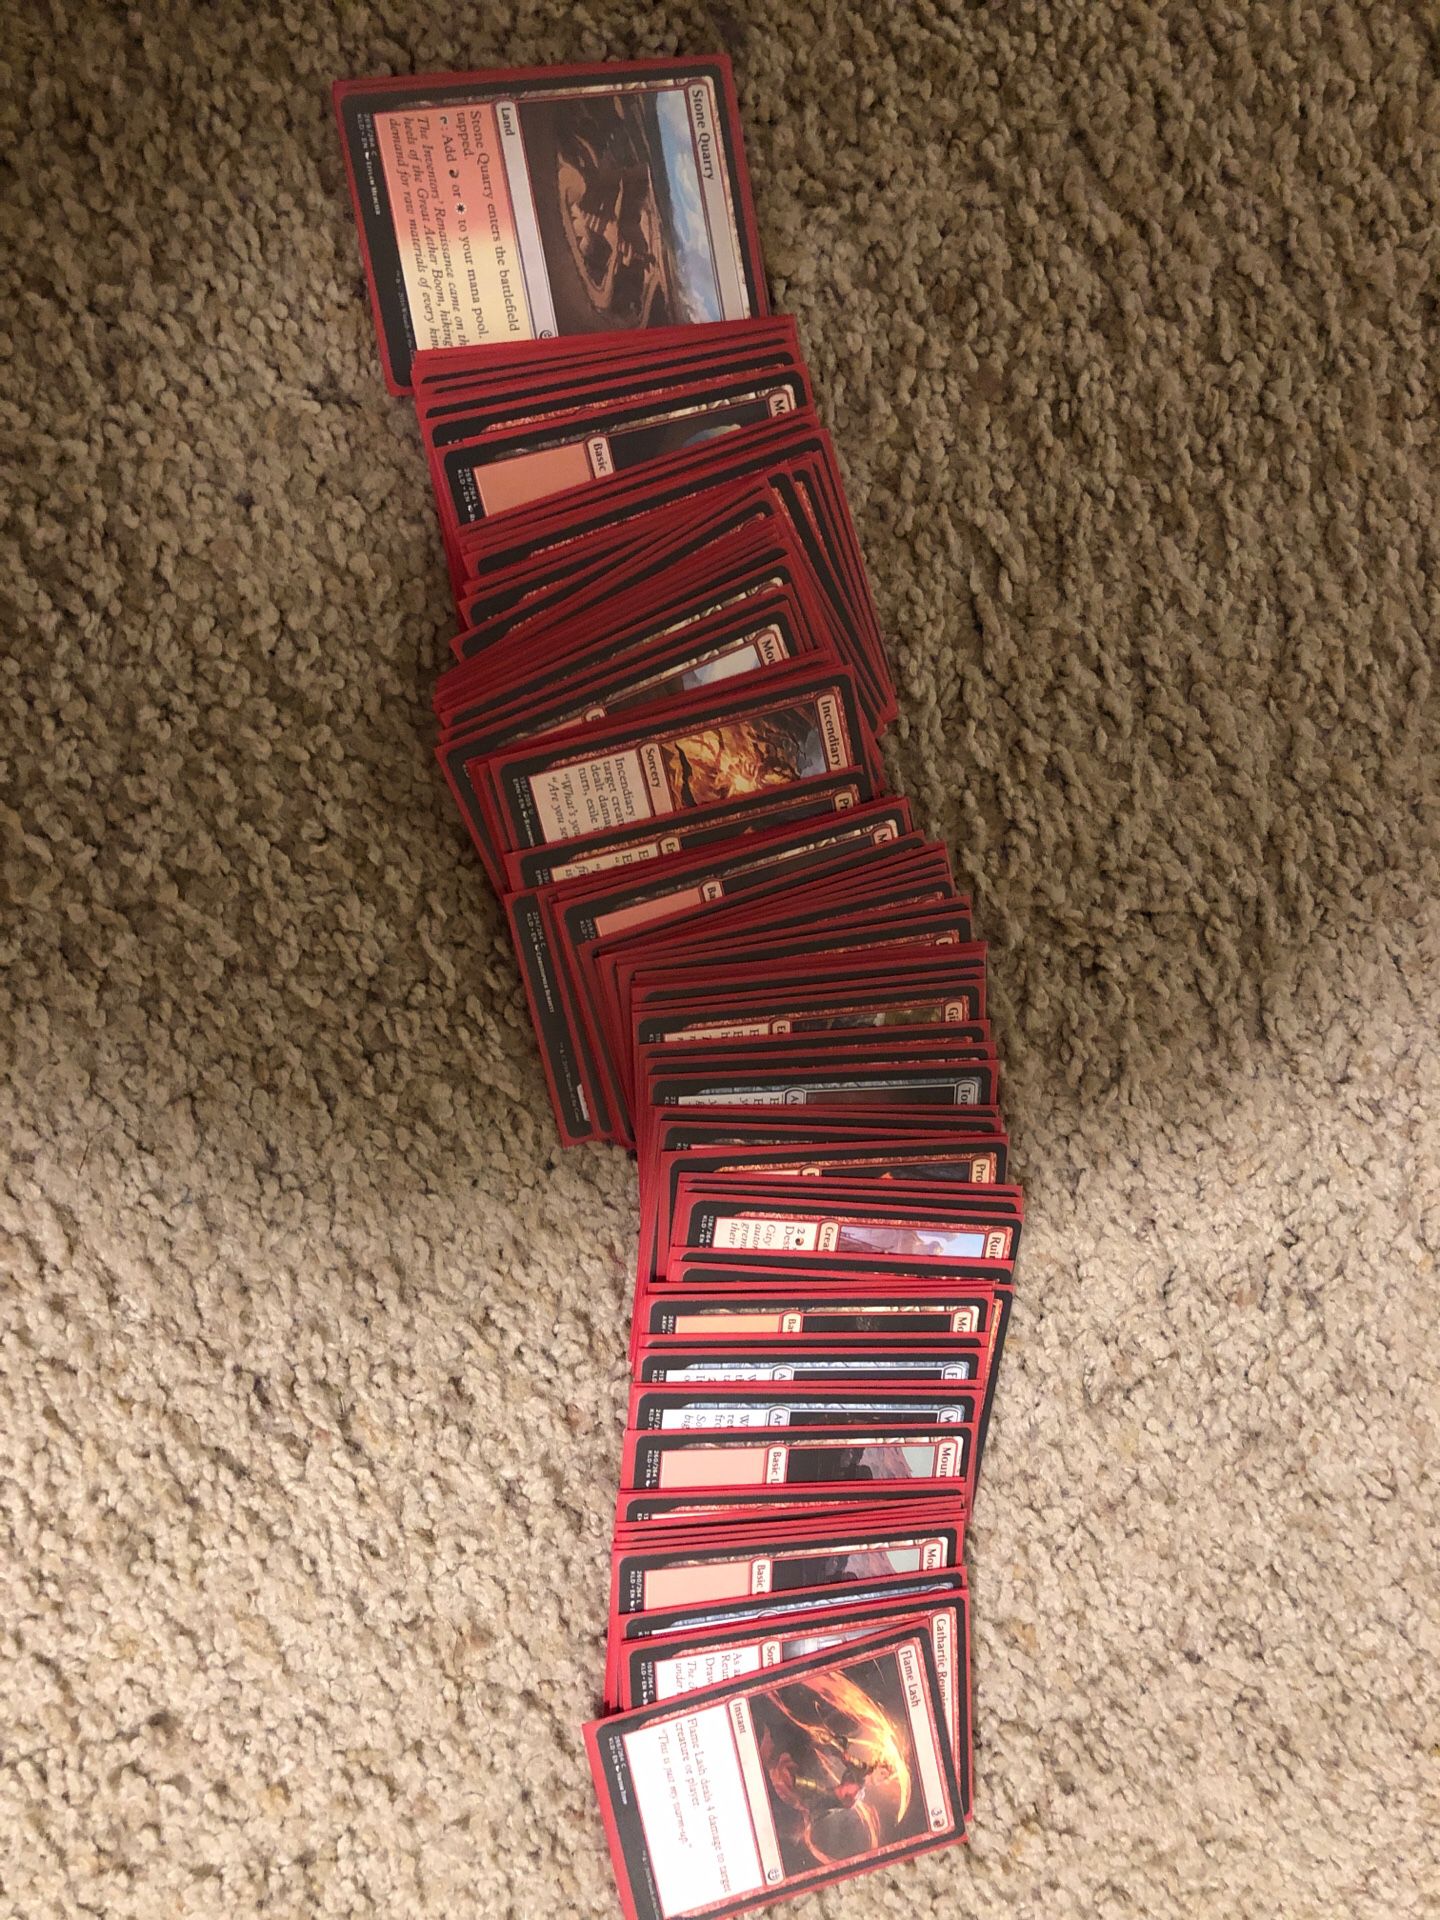 Magic the Gathering trading cards